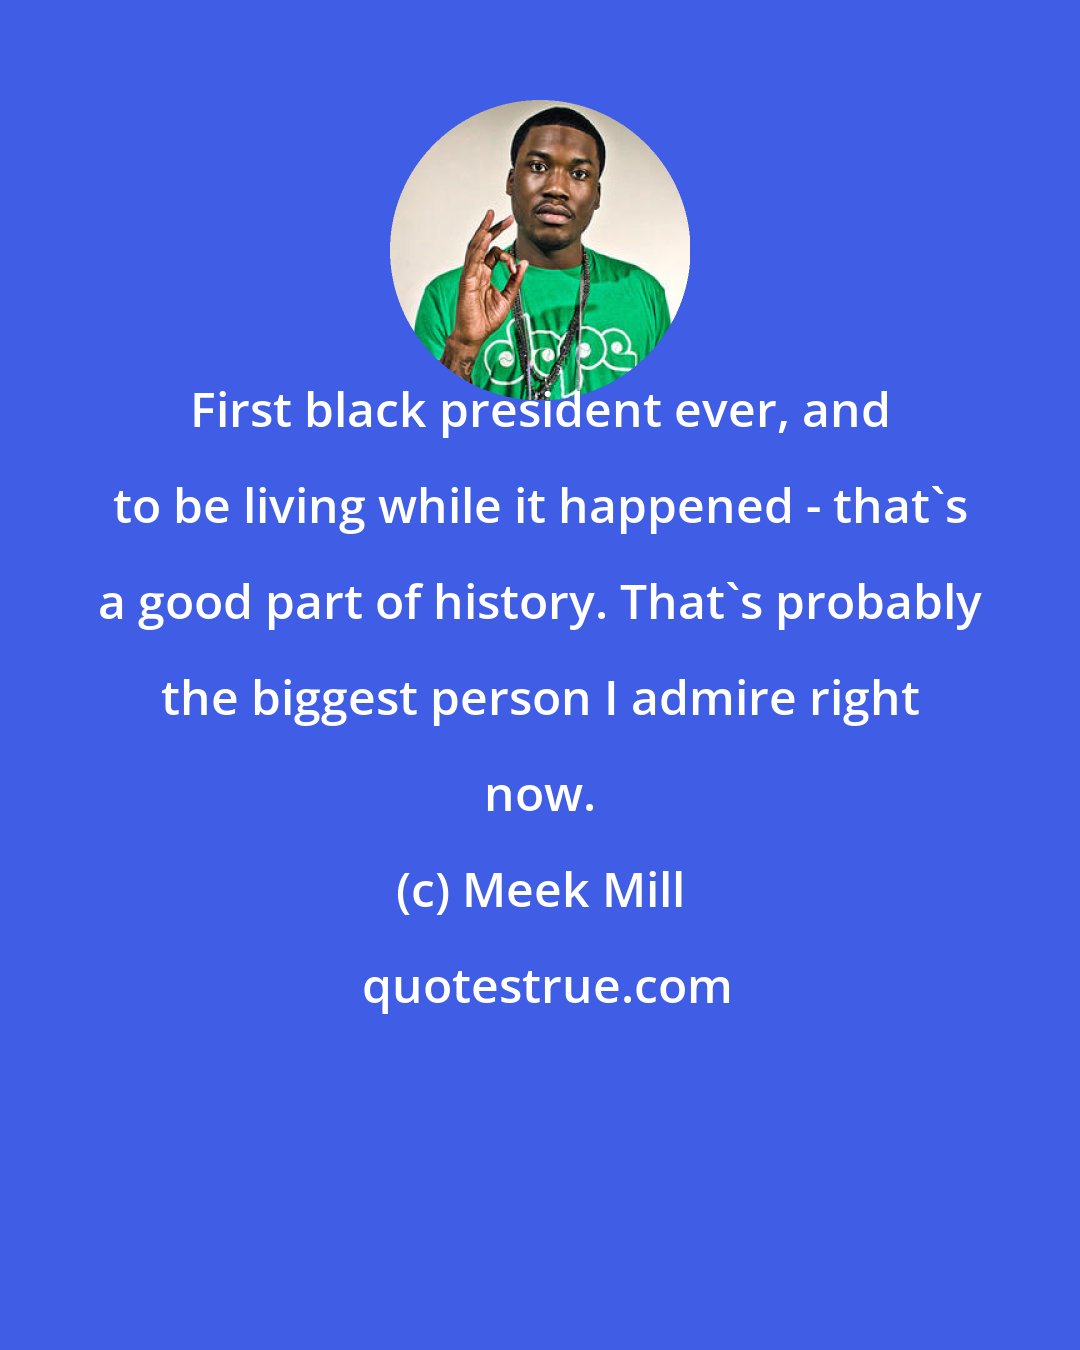 Meek Mill: First black president ever, and to be living while it happened - that's a good part of history. That's probably the biggest person I admire right now.